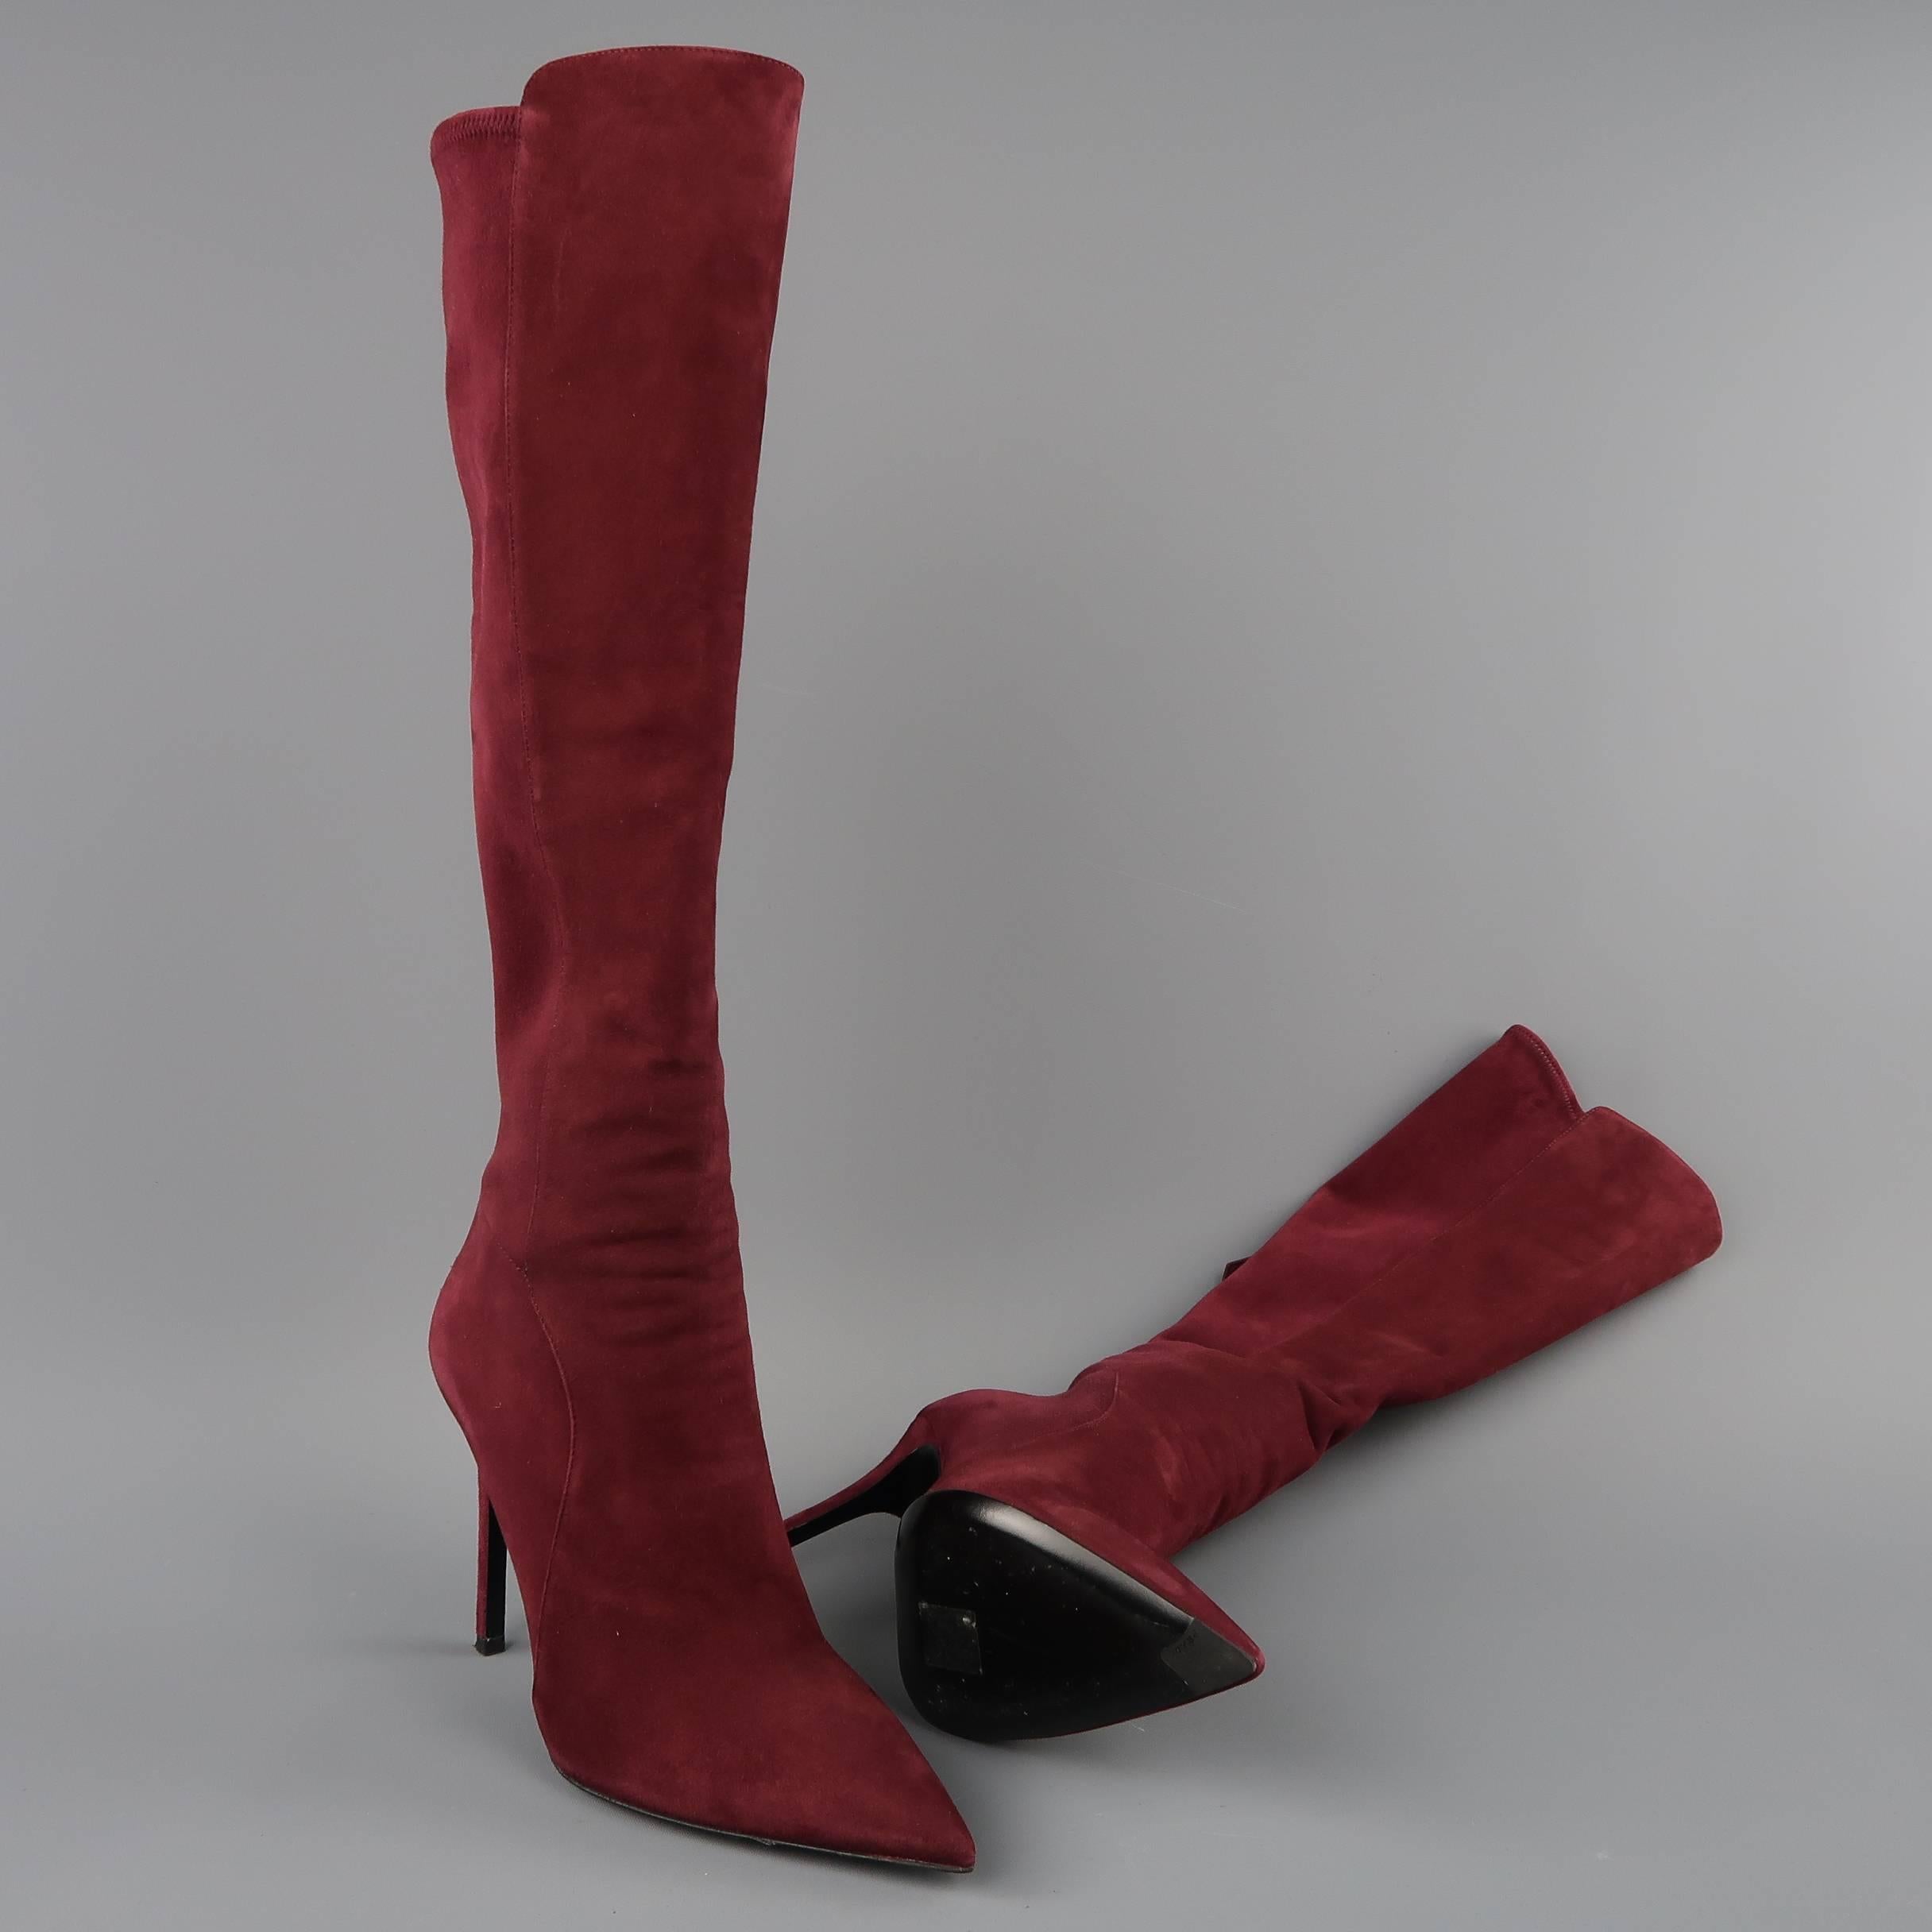 PRADA knee high boots come in burgundy suede with a pointed toe, covered stiletto heel, and back zip closure. Minor wear. Made in Italy.
 
Good Pre-Owned Condition.
Marked: IT 38.5
 
Measurements:
 
Heel: 4.25 in.
Length: 17 in.
